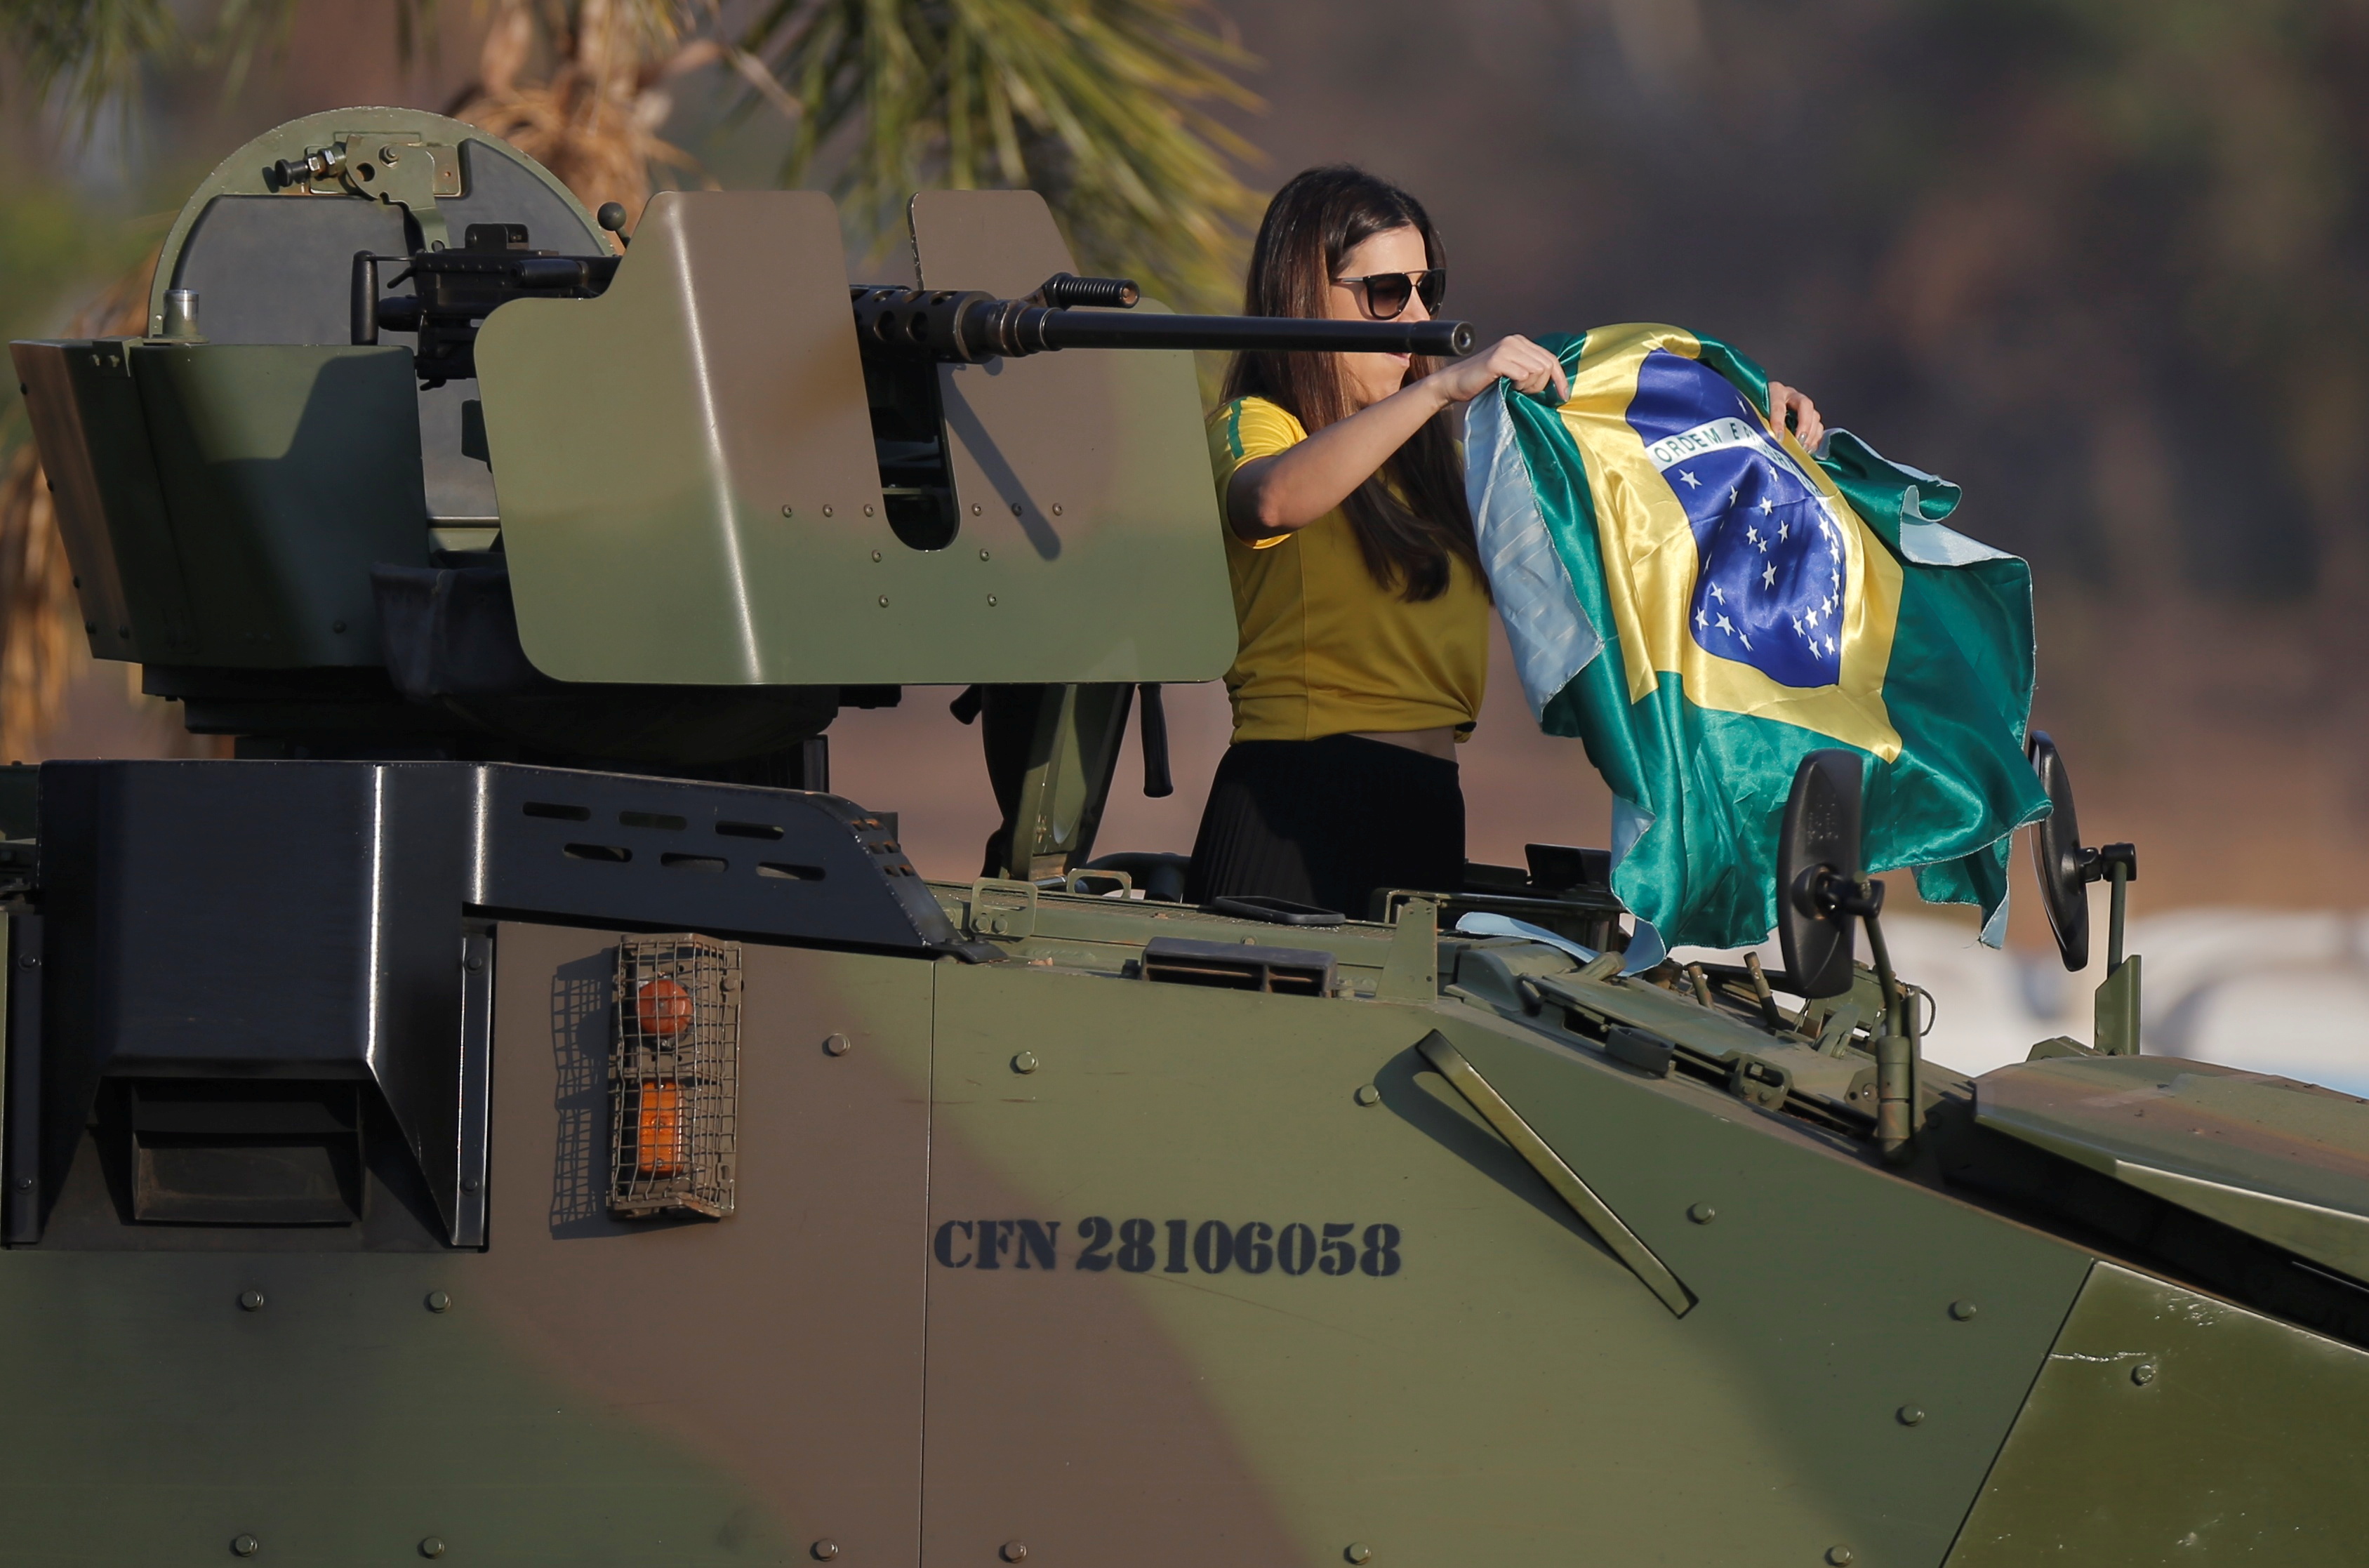 Reminder: RSVP for Brazil Resists: Fighting For Democracy in Bolsonaro's  First Two Years (Virtual Event)